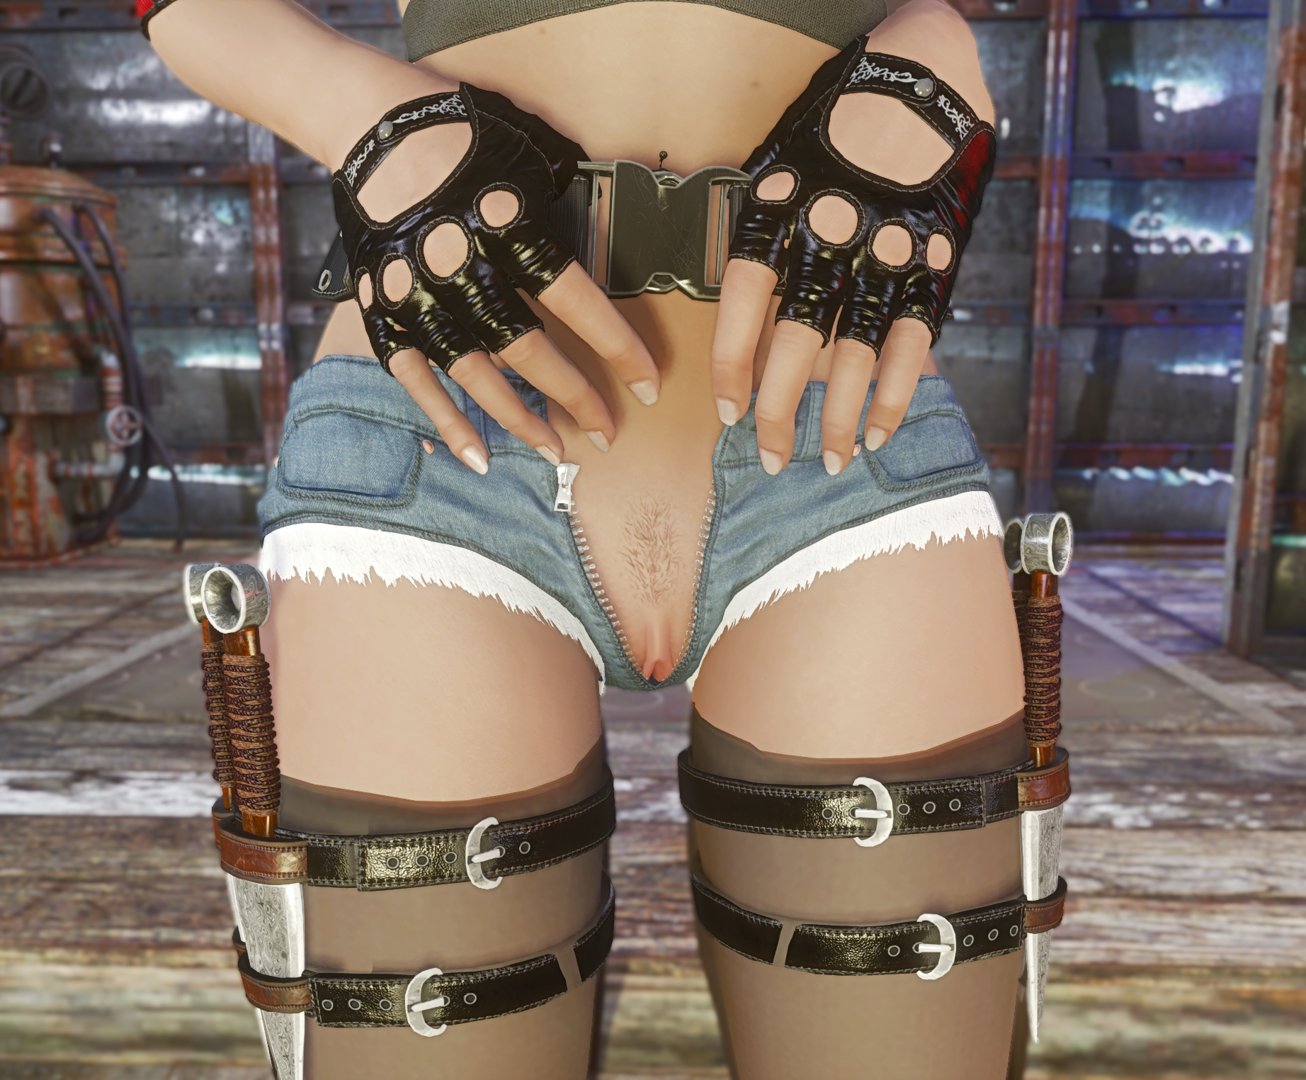 Real handcuffs fallout 4 фото 101